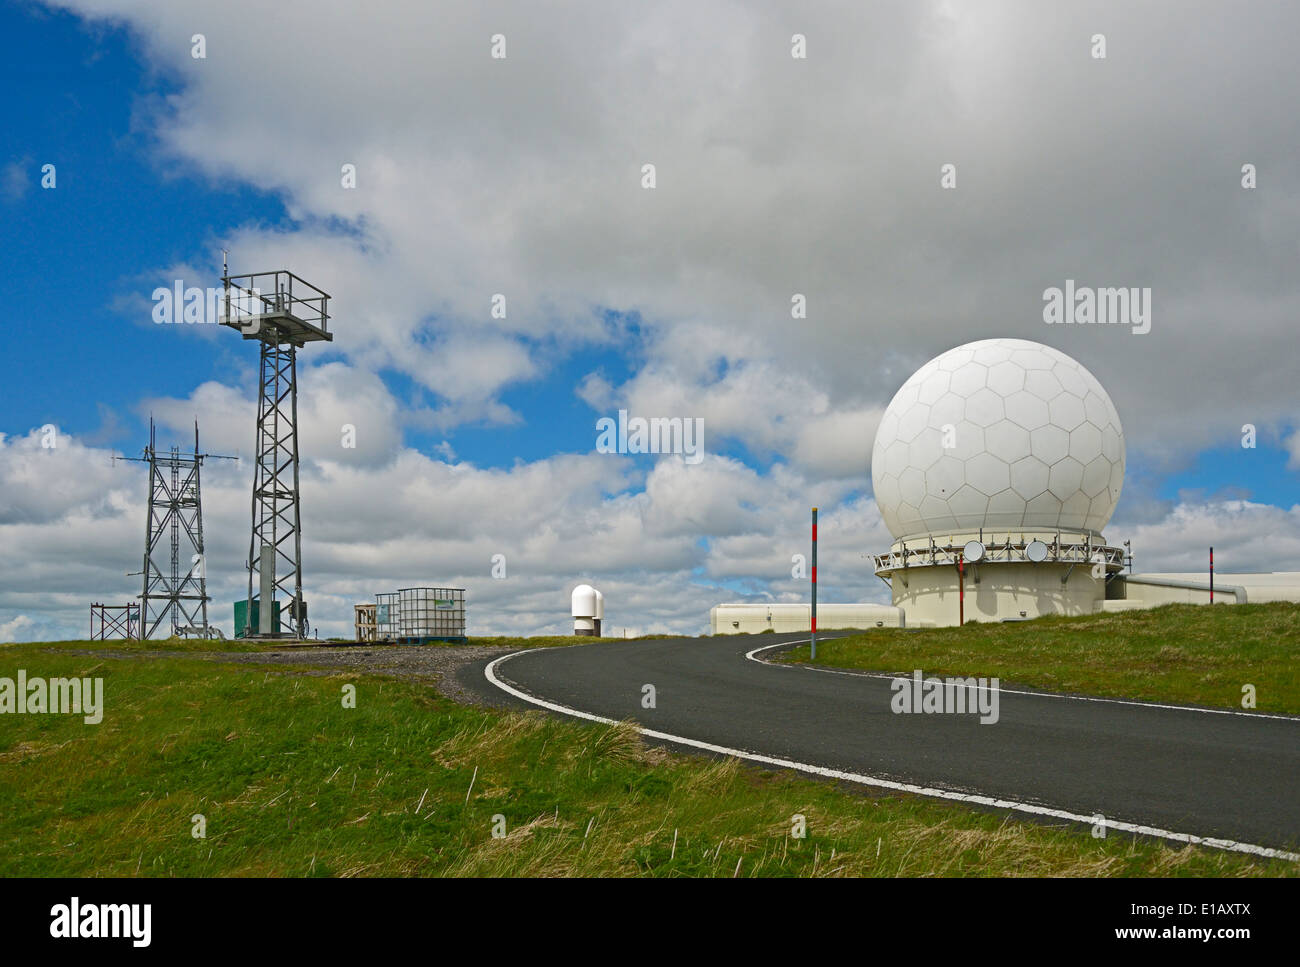 National Air Traffic Services station de radar. Great Dun Fell, Cumbria, Angleterre, Royaume-Uni, Europe. Banque D'Images